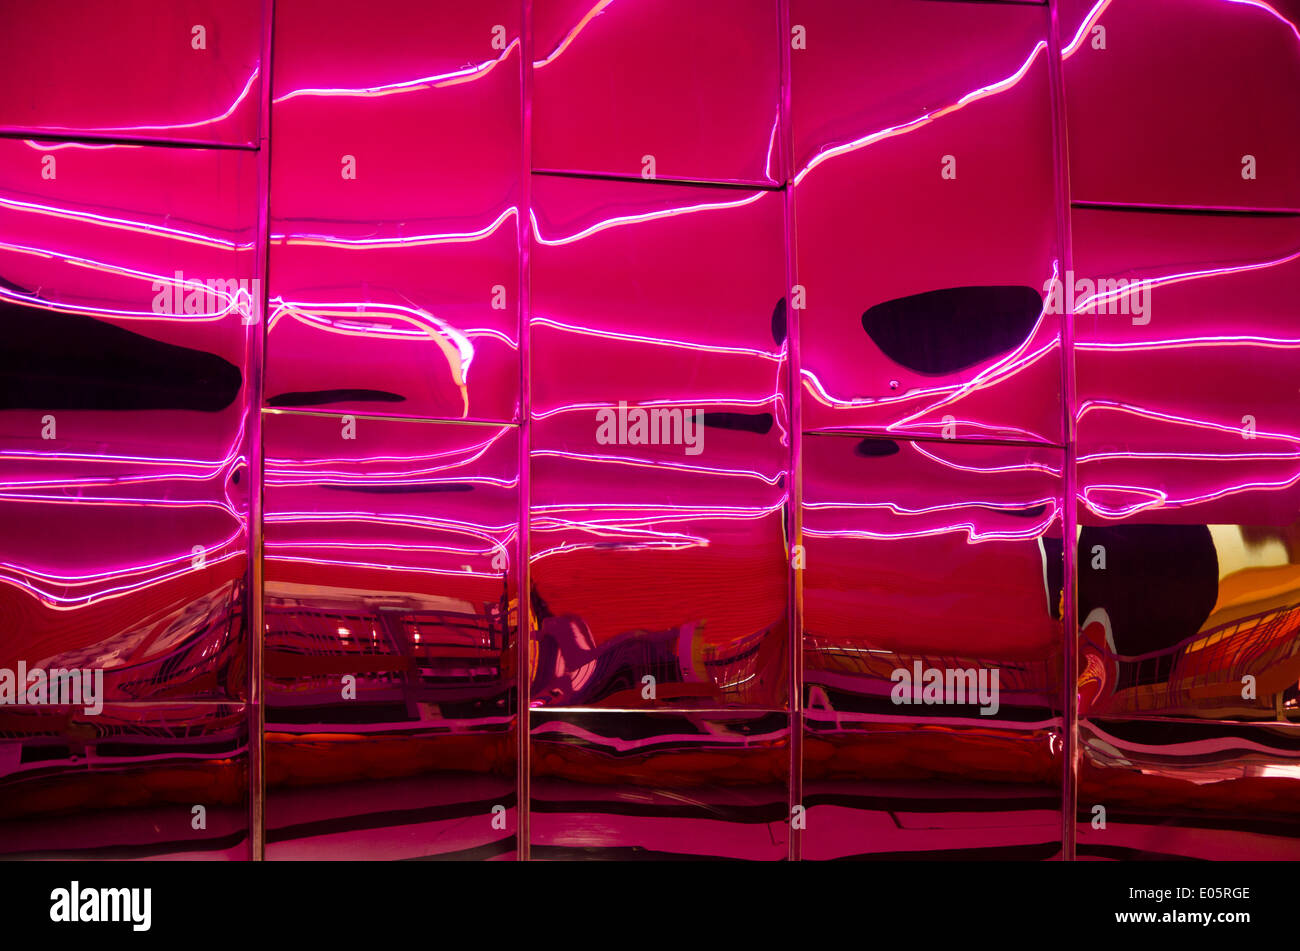 Pink neon lights reflected in stainless steel architecture. Taken at The Public arts Centre, West Bromwich West Midlands UK. Stock Photo